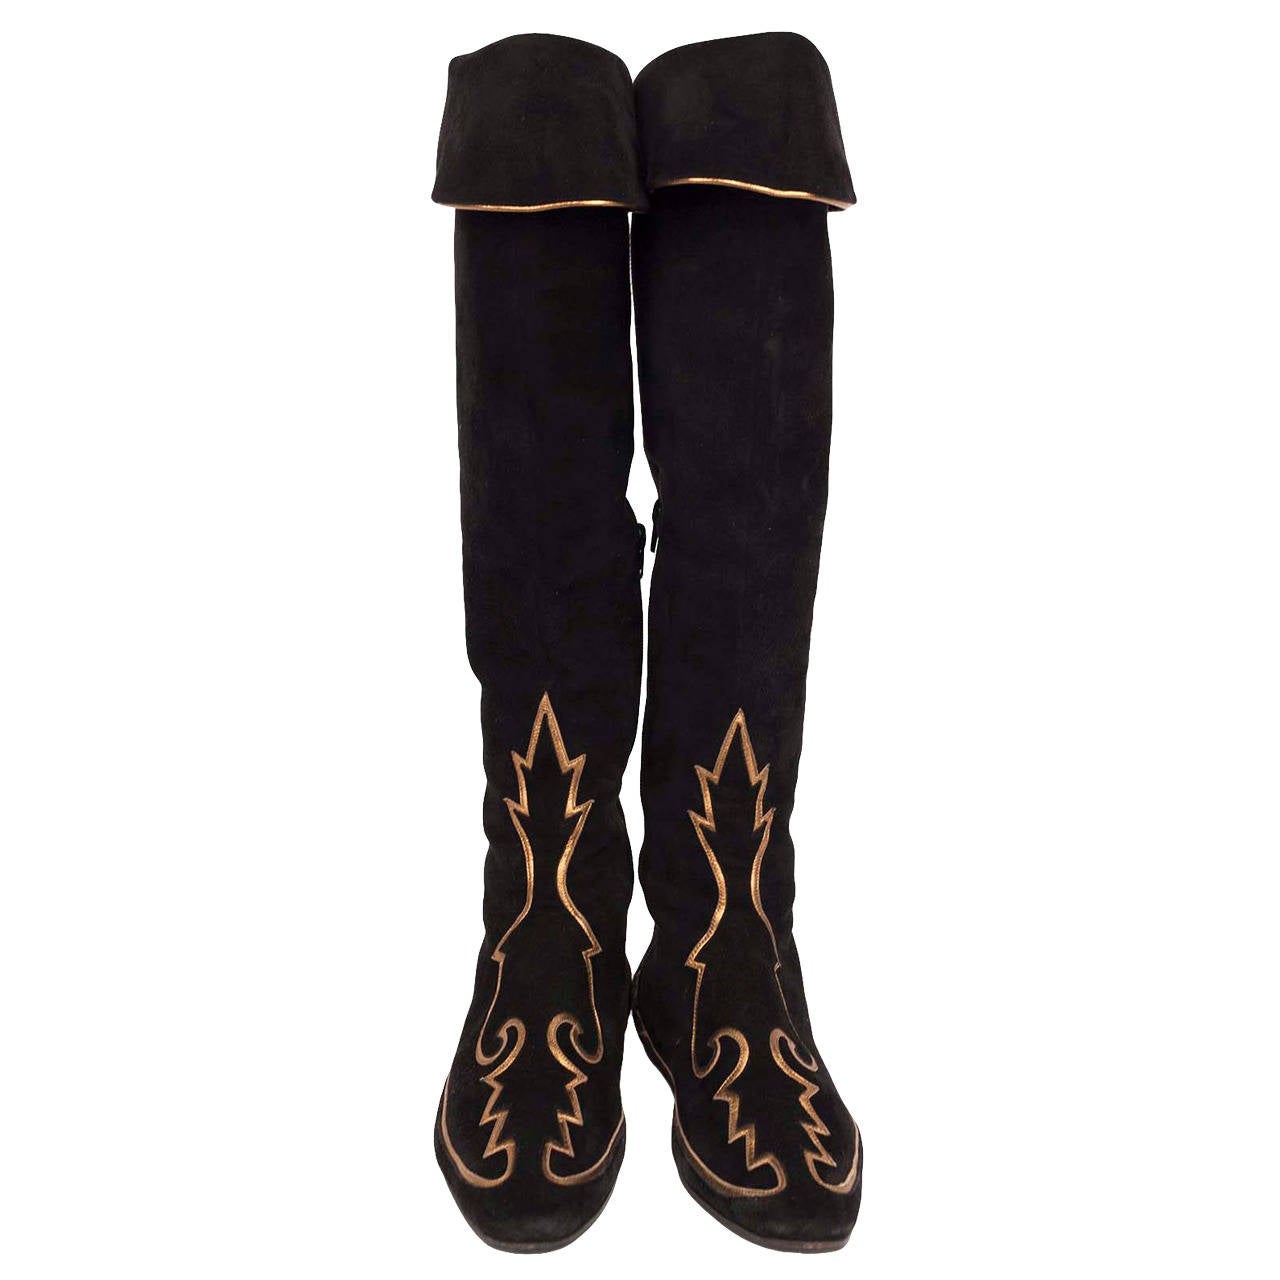 Manolo Blahnik black over-knee suede boots. Boots have gold leather trim on front shoe and around fold over flap at top thigh, pointed toe and flat heel, lined in soft natural leather. Boots have been resoled in front bottom.